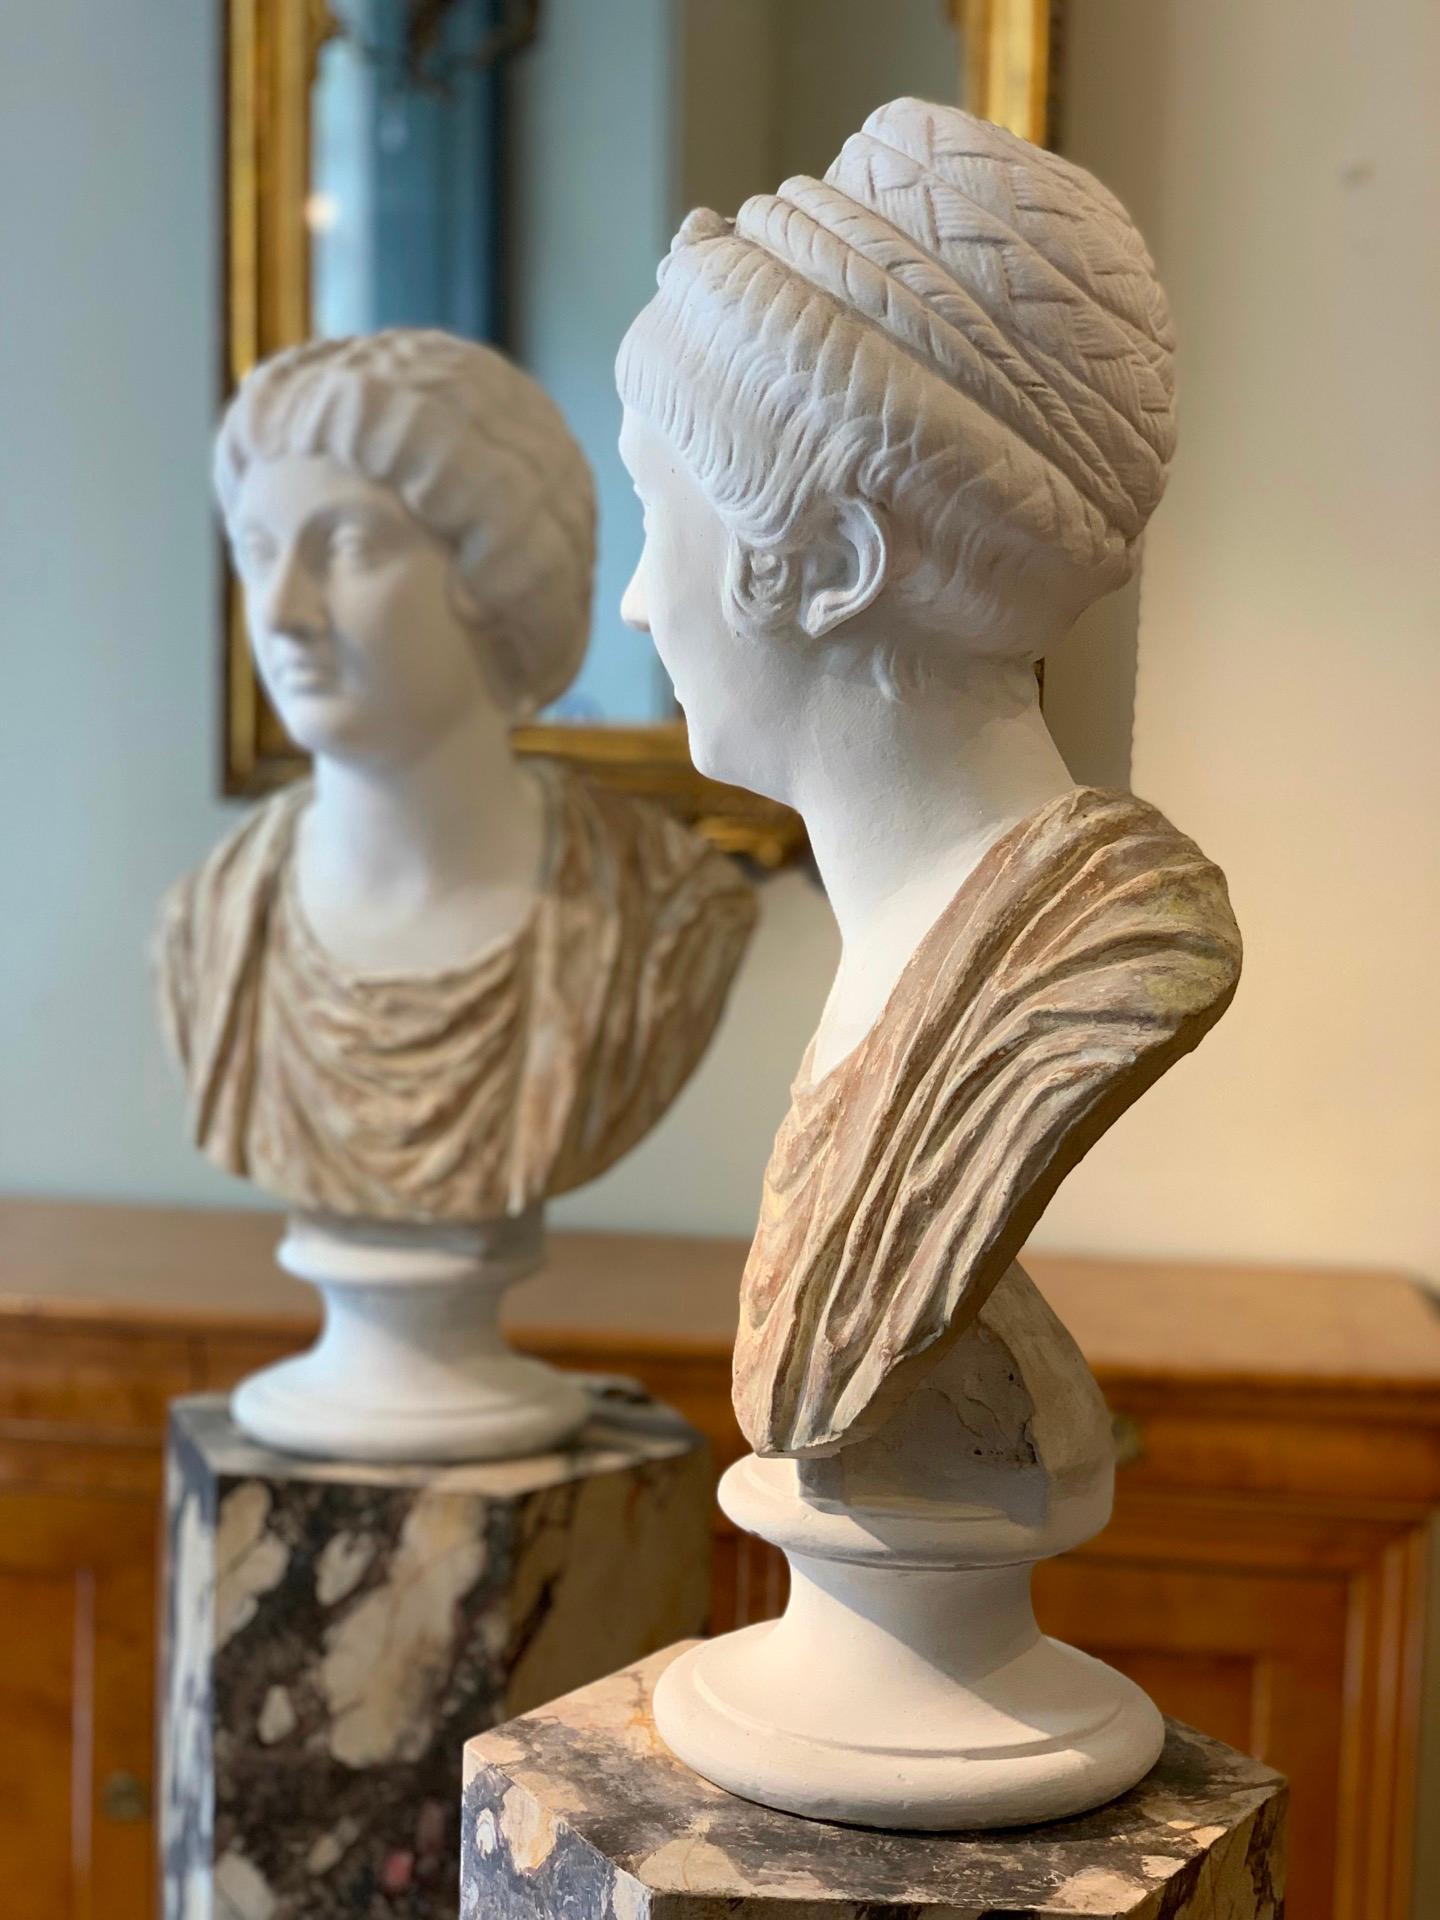 Pair of terracotta and plaster busts depicting two elegant Roman matrons and empresses, Claudia Ottavia and Livia Drusilla. Claudia Octavia, daughter of Emperor Claudius and wife of Nero, is depicted with a regal expression and an intricate